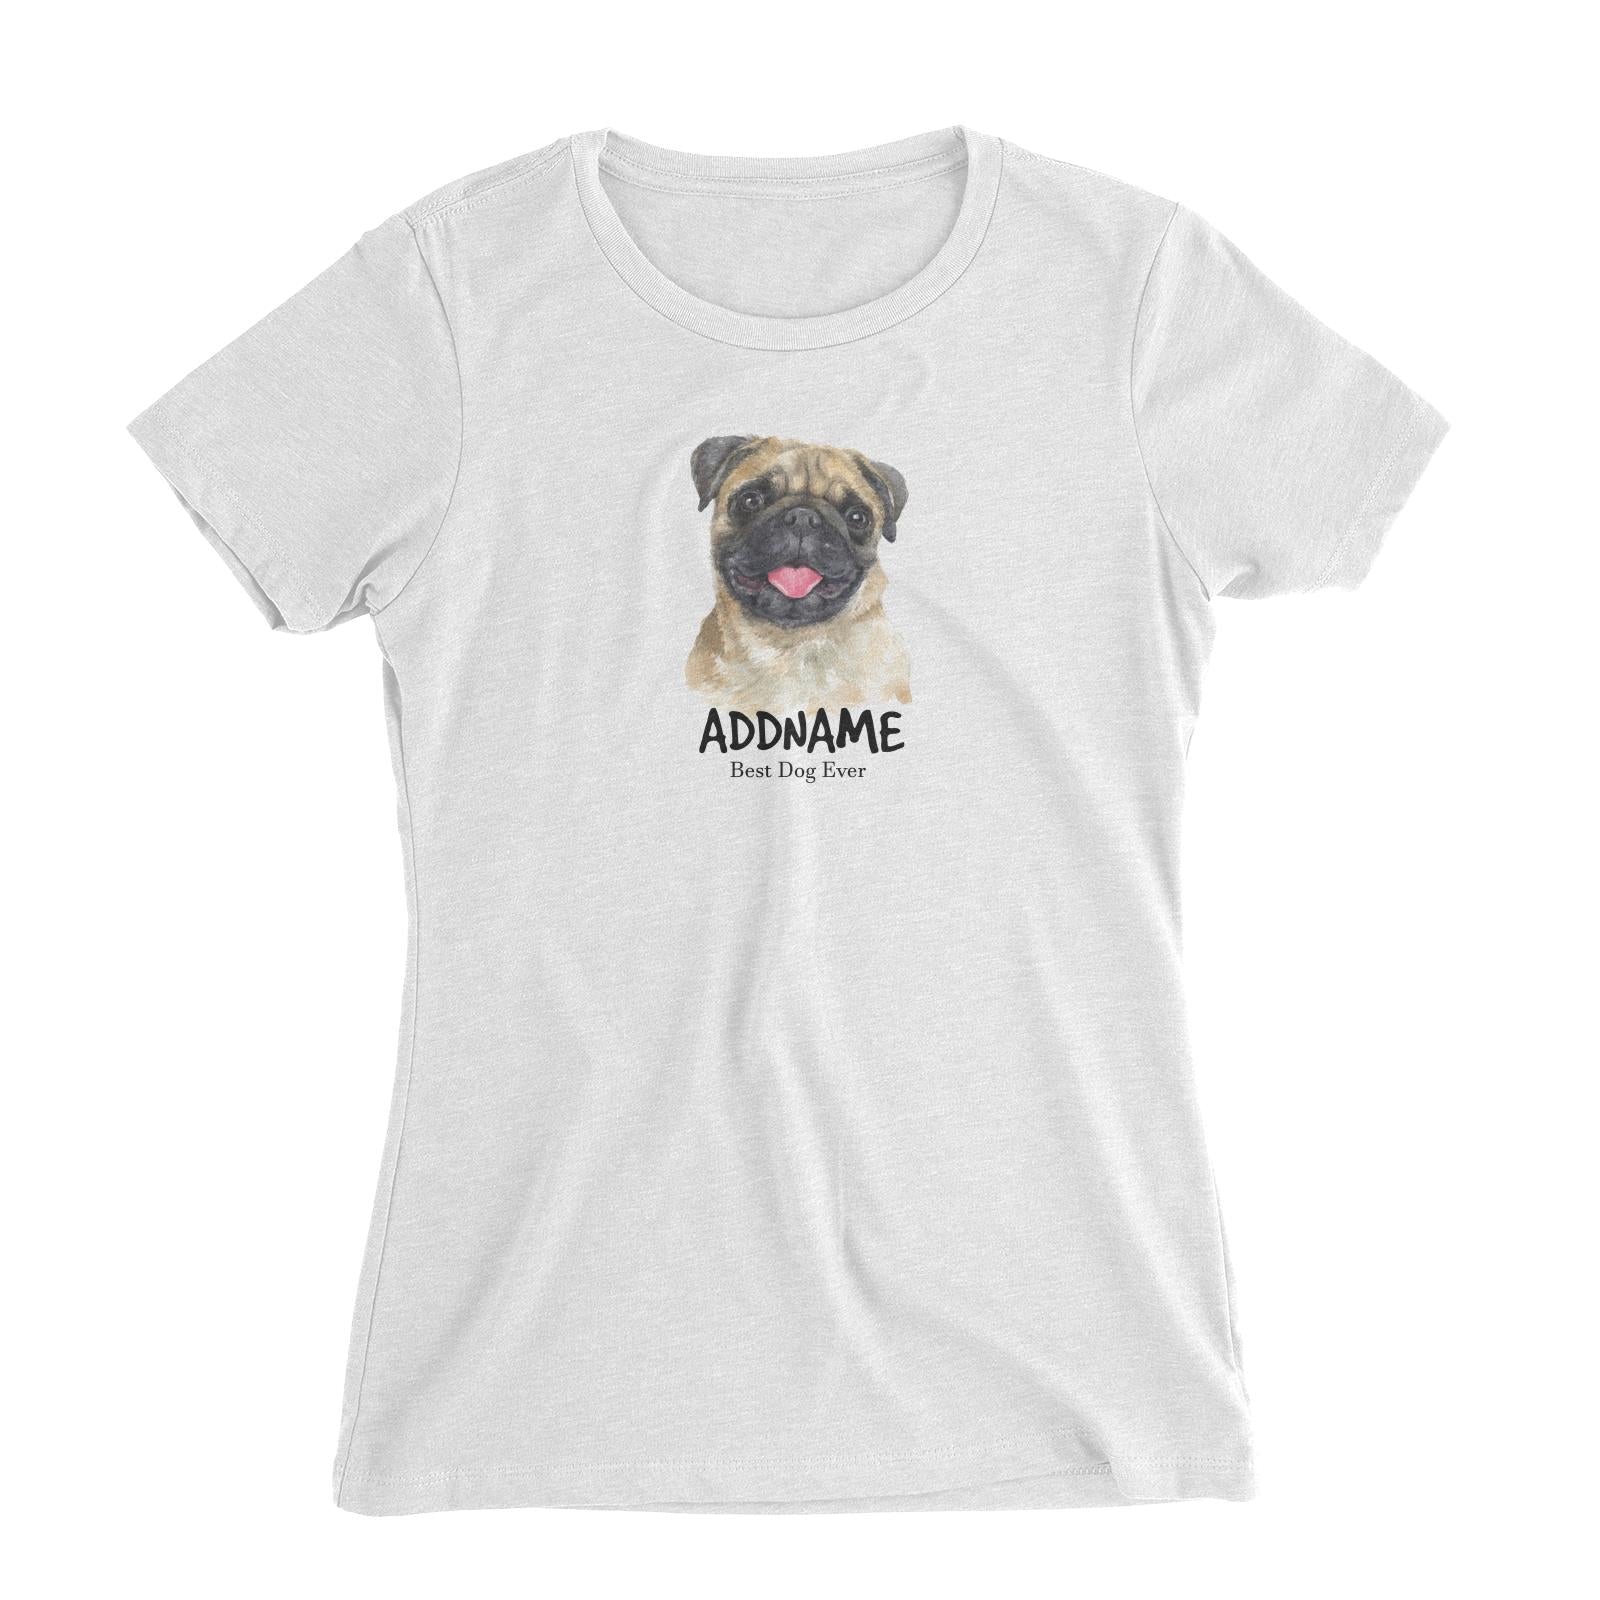 Watercolor Dog Pug Happy Best Dog Ever Addname Women's Slim Fit T-Shirt